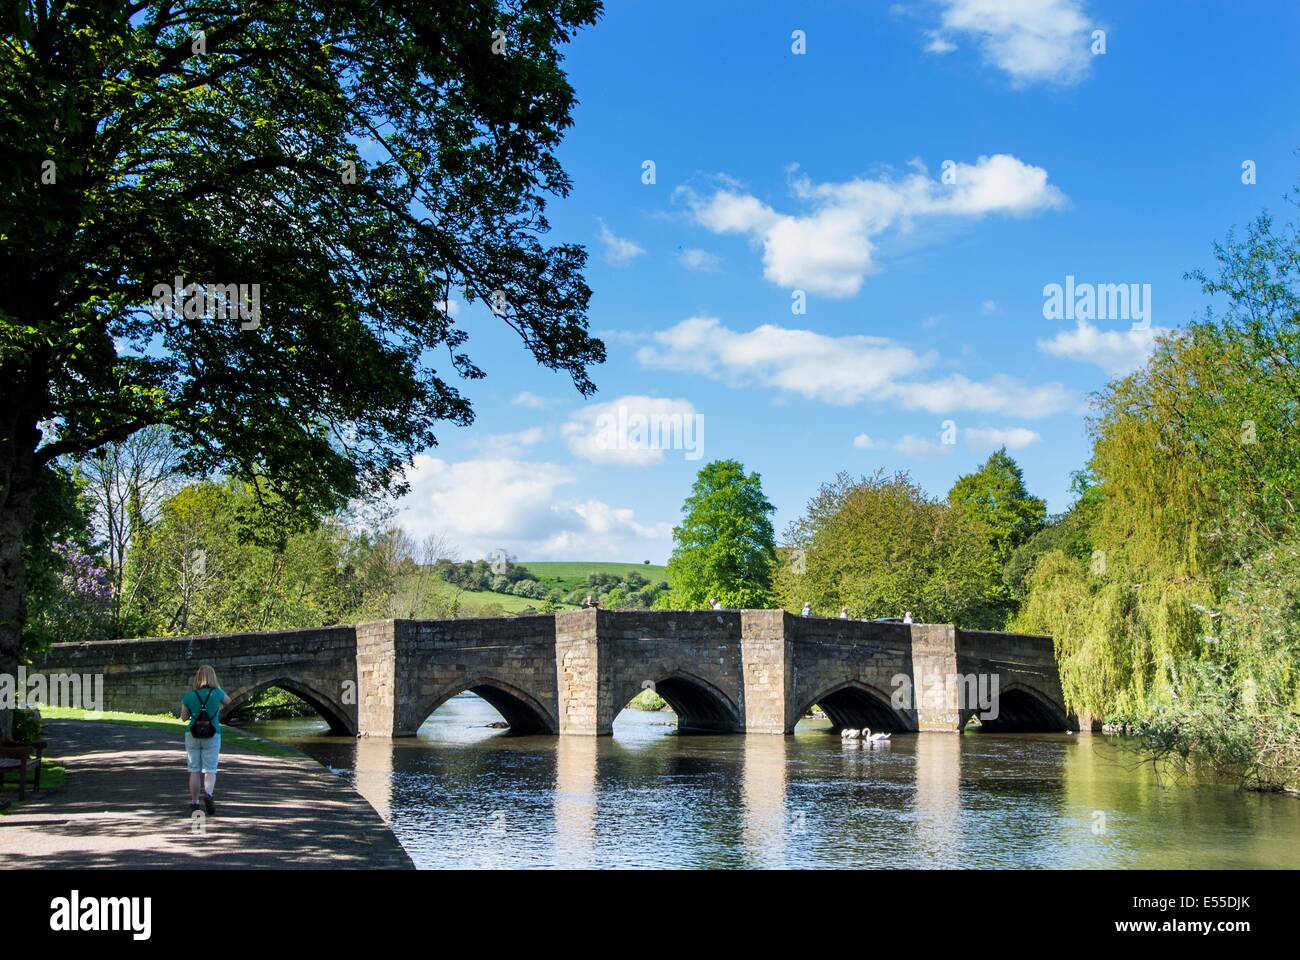 The Grade I listed five-arched bridge over the River Wye at Bakewell, Derbyshire. Stock Photo